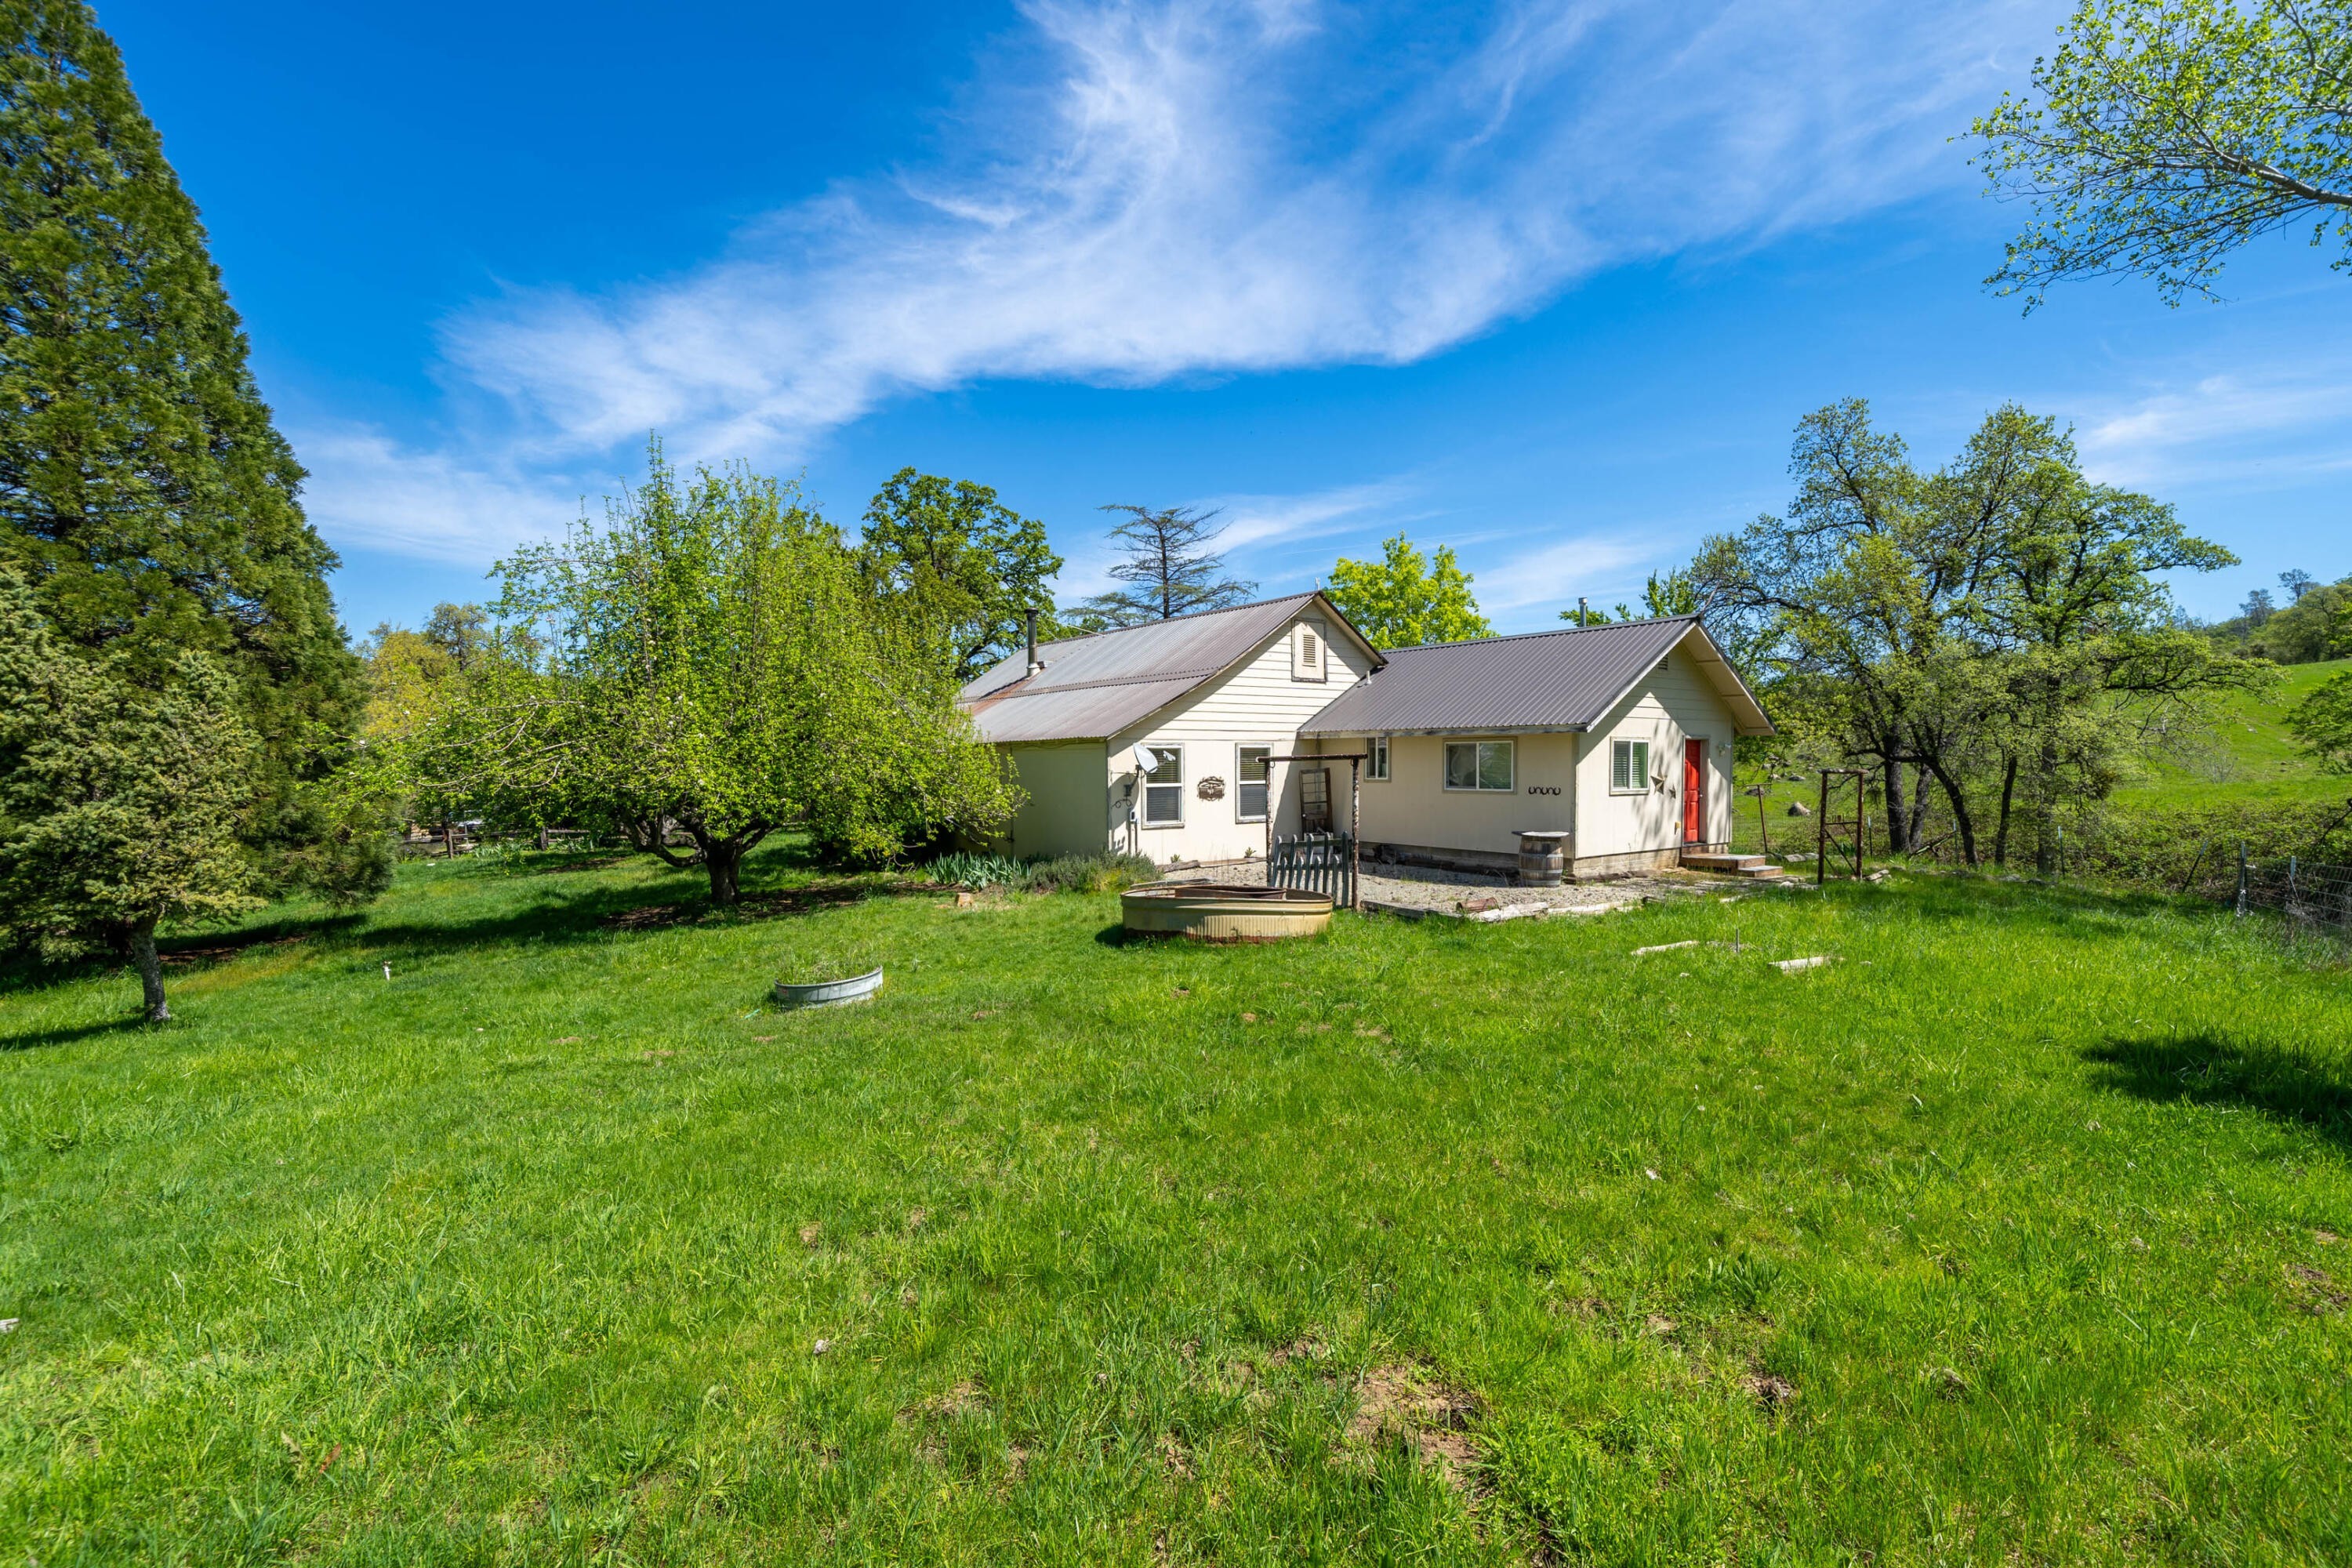 22. 9568 Blue Mountain Ranch Road